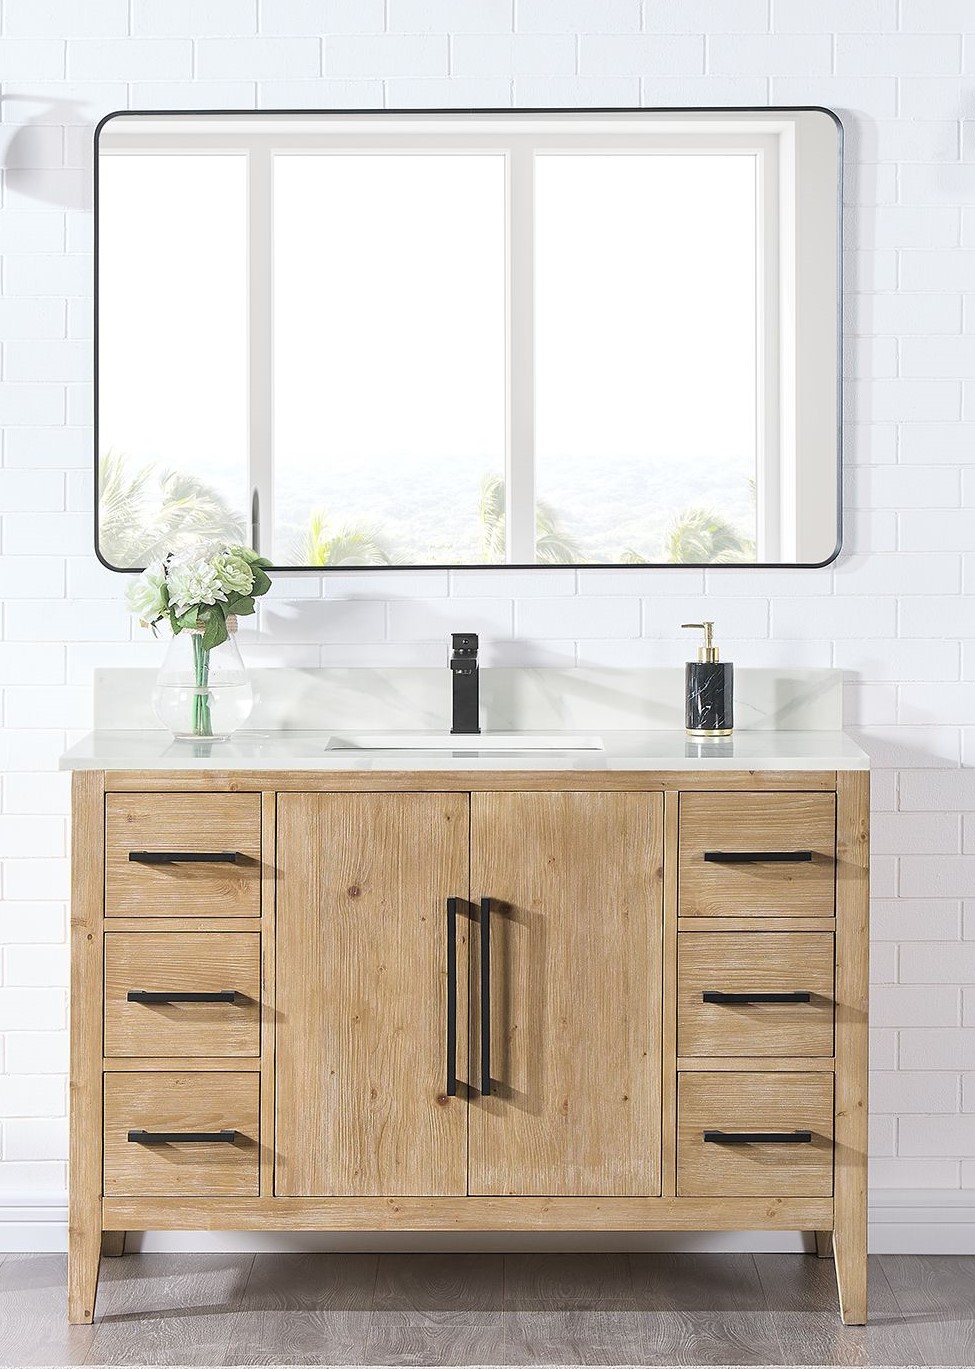 Issac Edwards 48" Single Bathroom Vanity in Weathered Fir with Calacatta White Quartz Stone Countertop